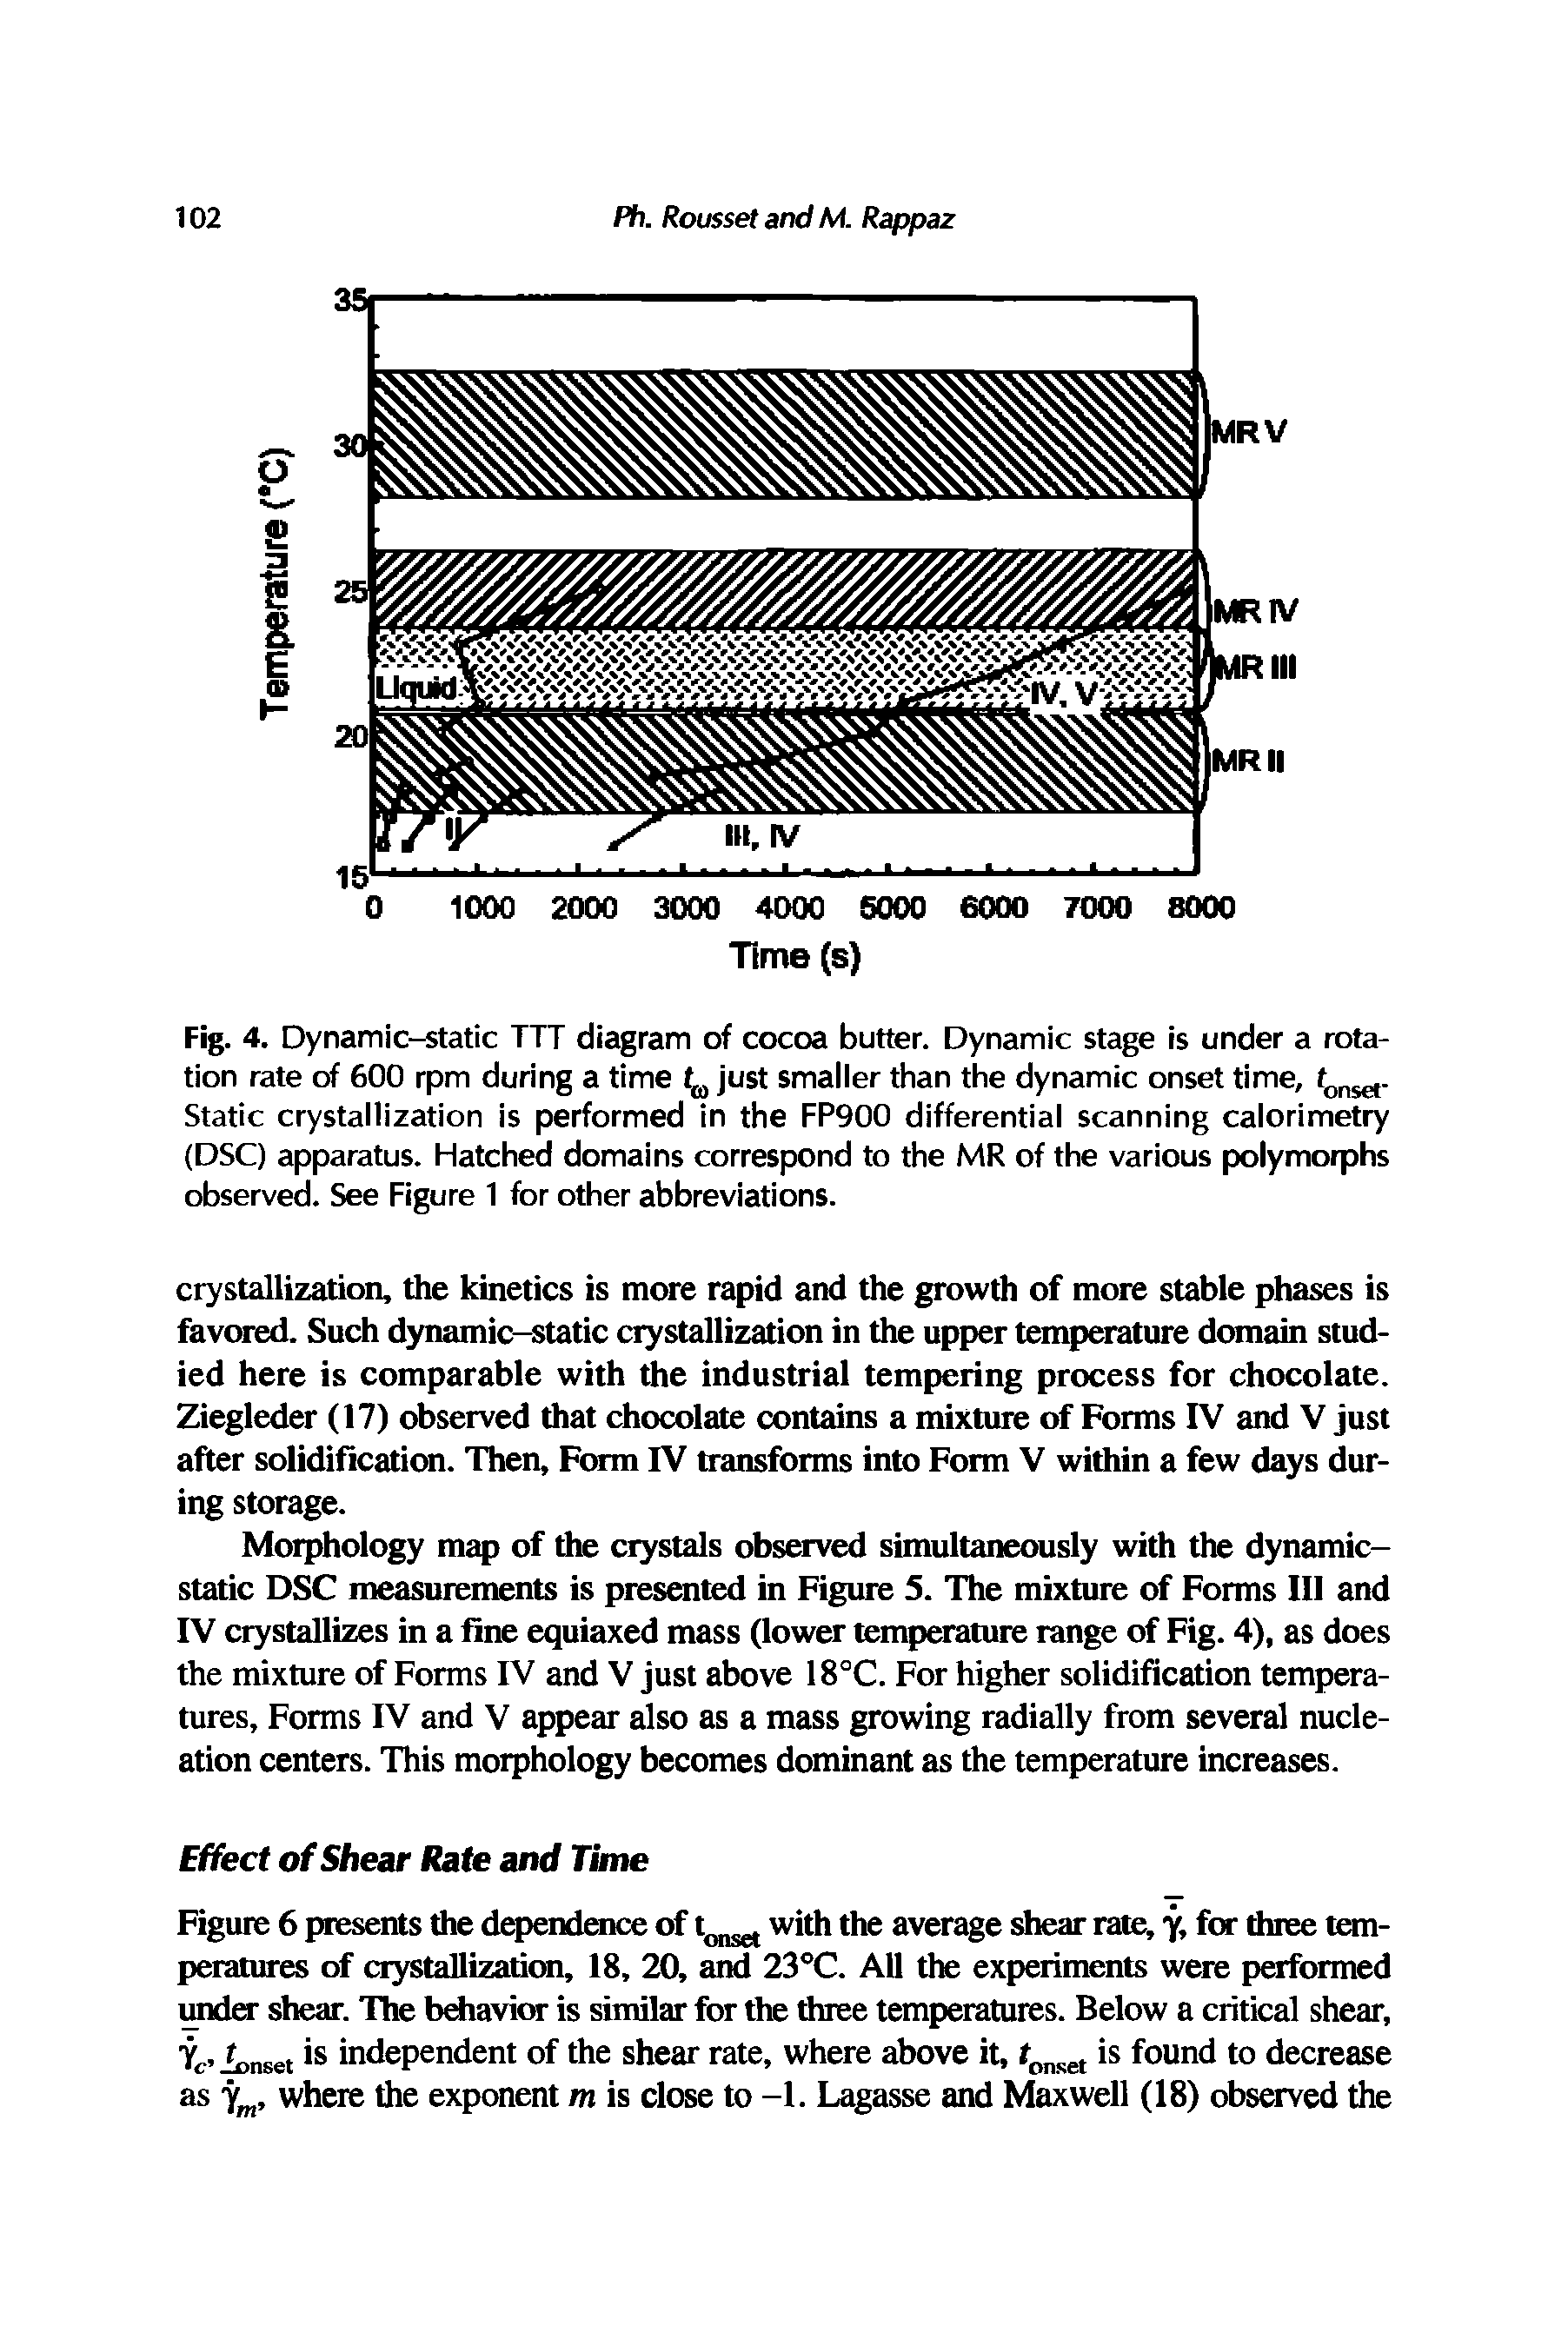 Fig. 4. Dynamic-static TTT diagram of cocoa butter. Dynamic stage is under a rotation rate of 600 rpm during a time just smalier than the dynamic onset time,...